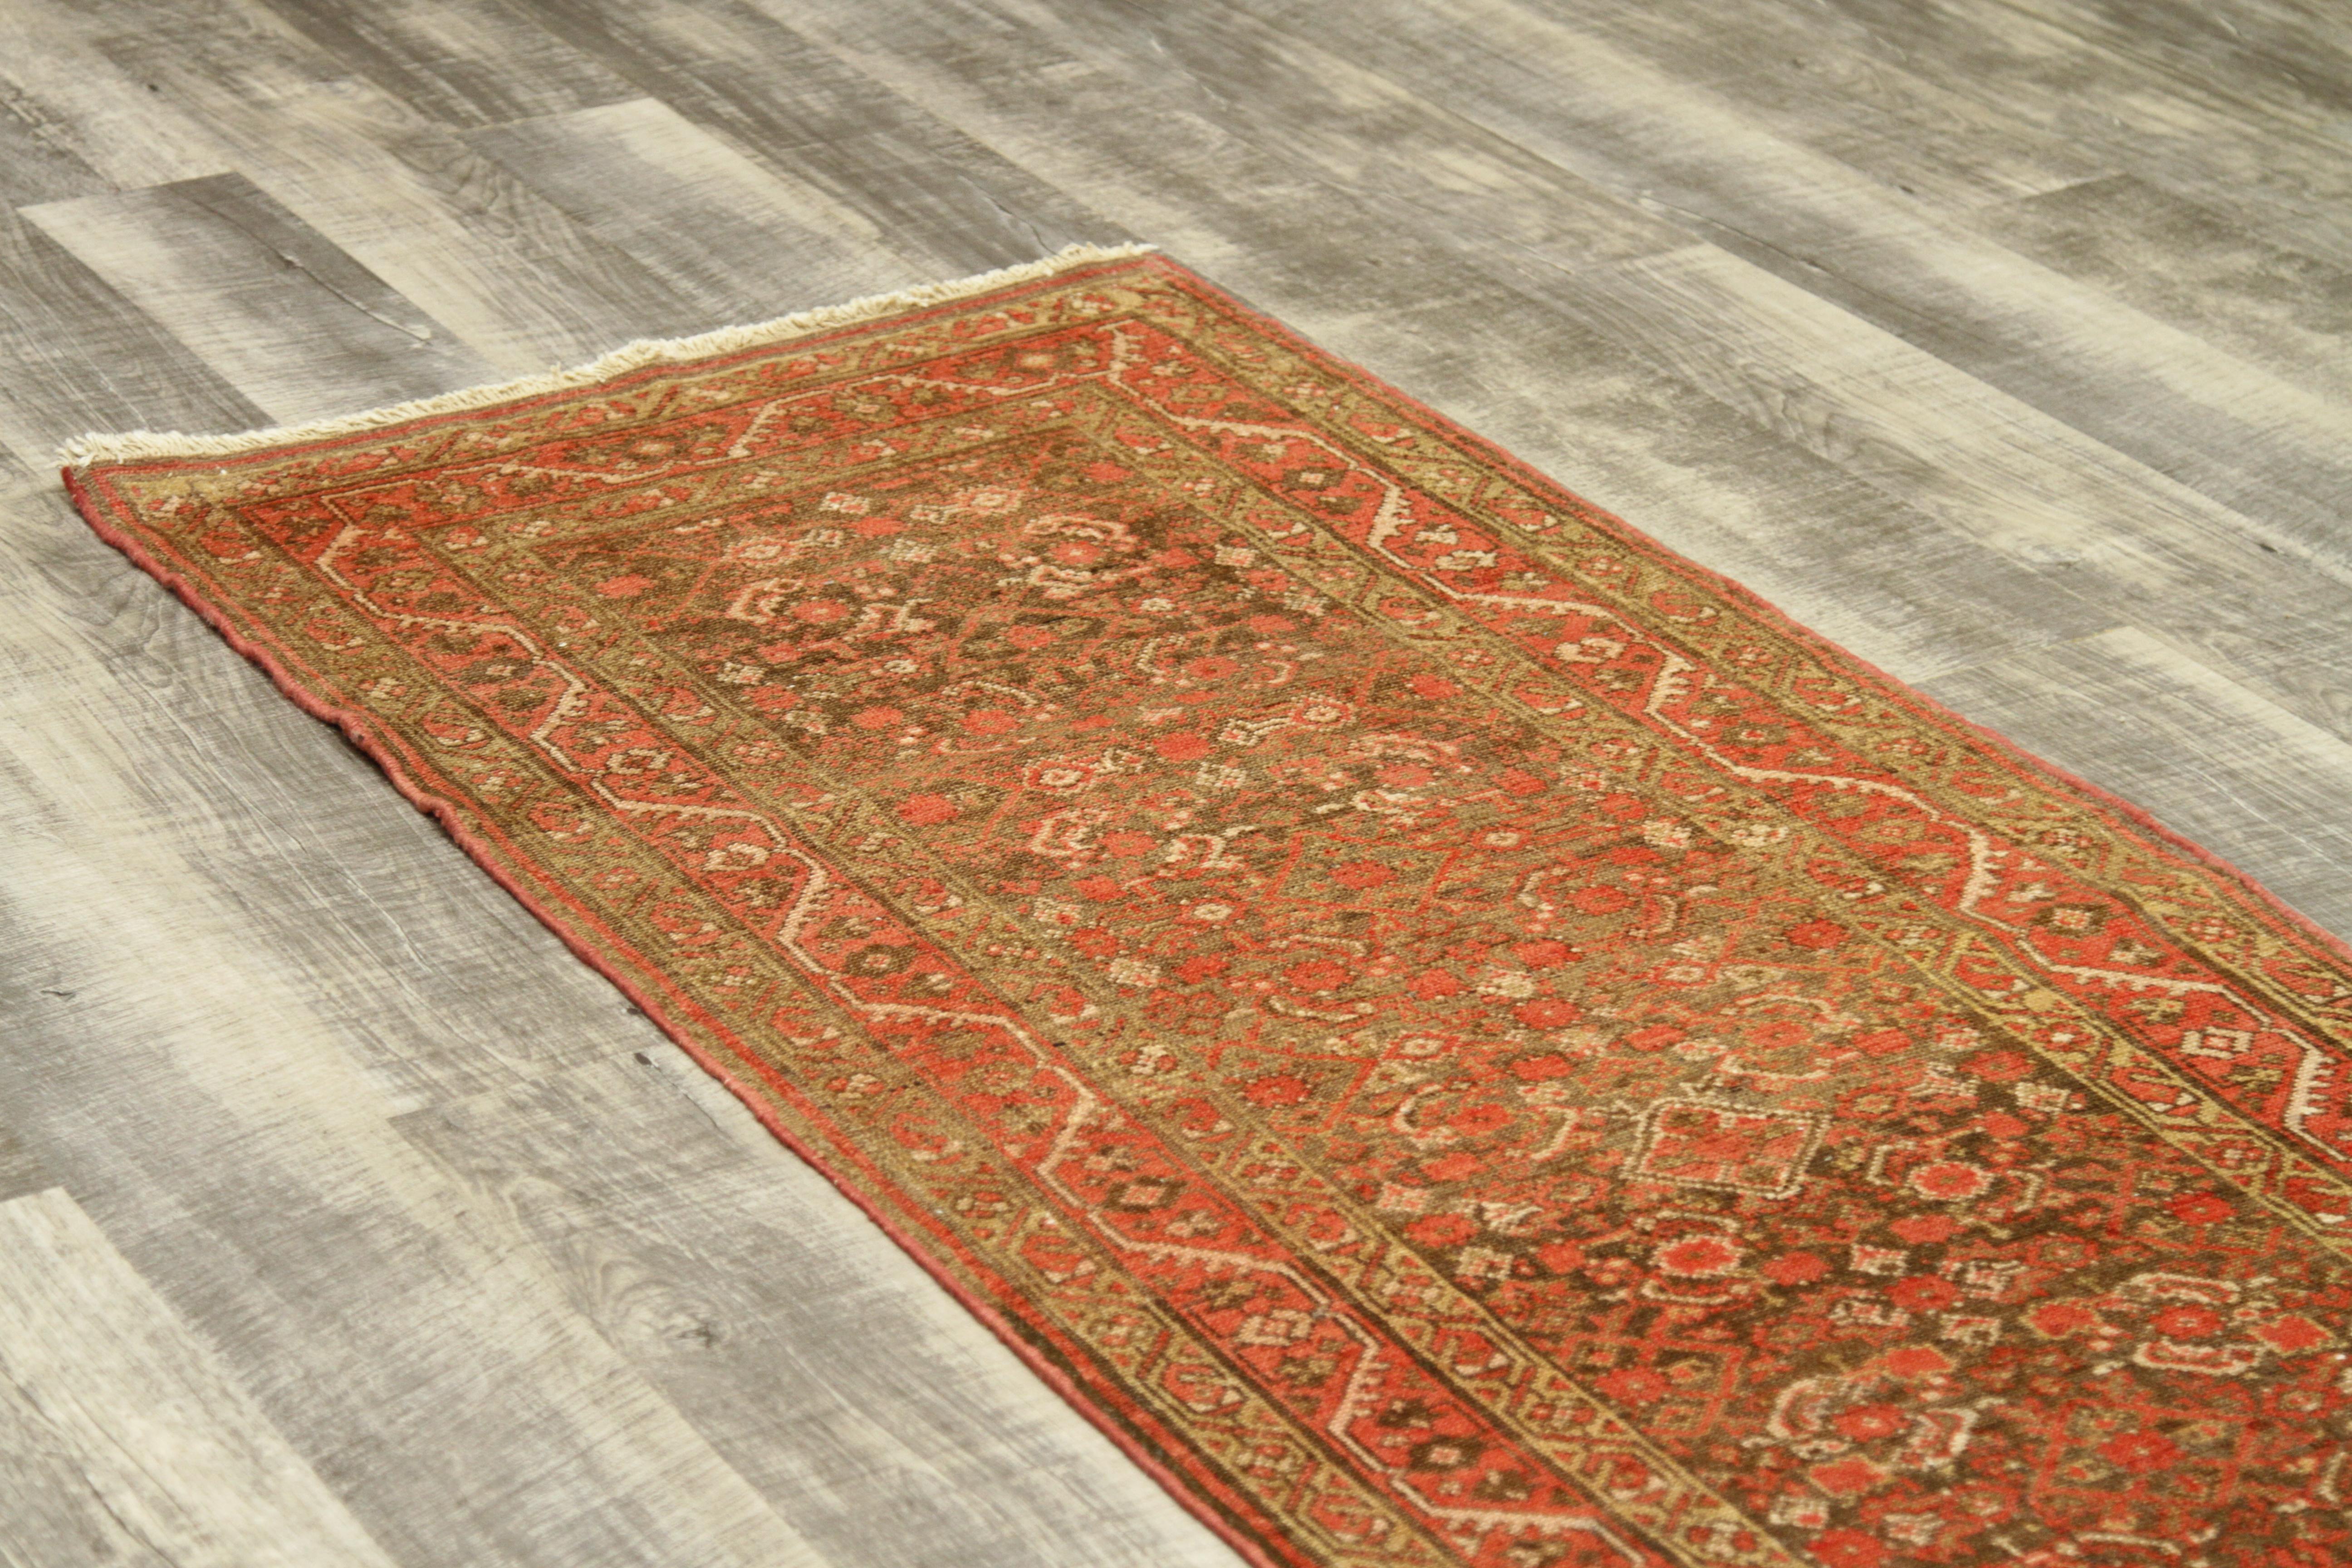 Antique Persian Rug in Malayer Design, 1910 For Sale 3